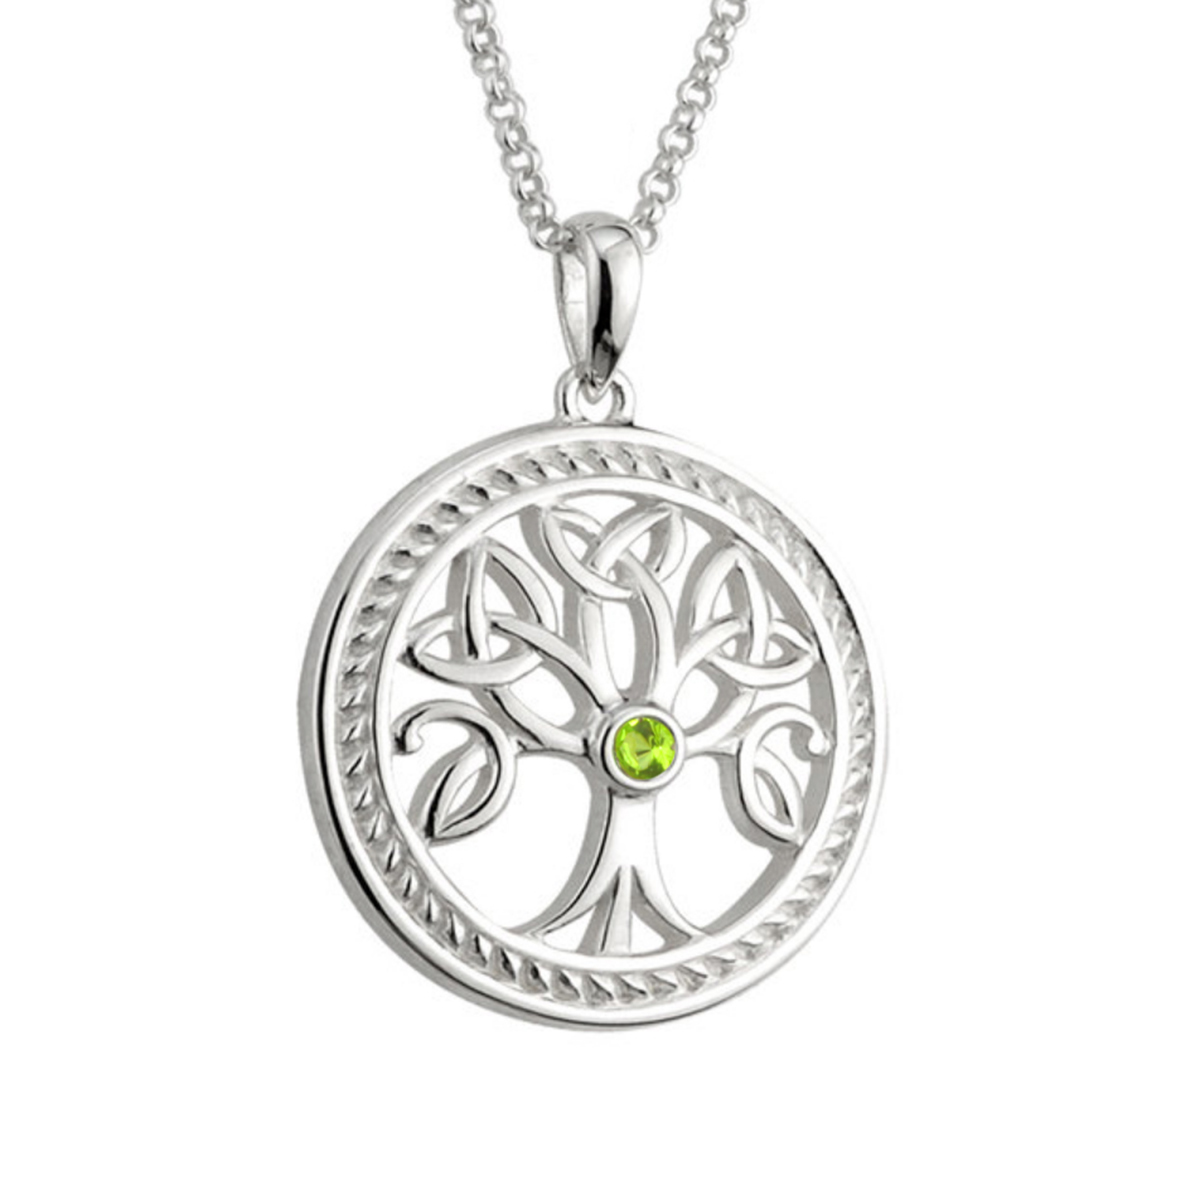 Trinity Tree of Life Kette  & Anhänger aus Irland - Sterling Silber & Kristall 